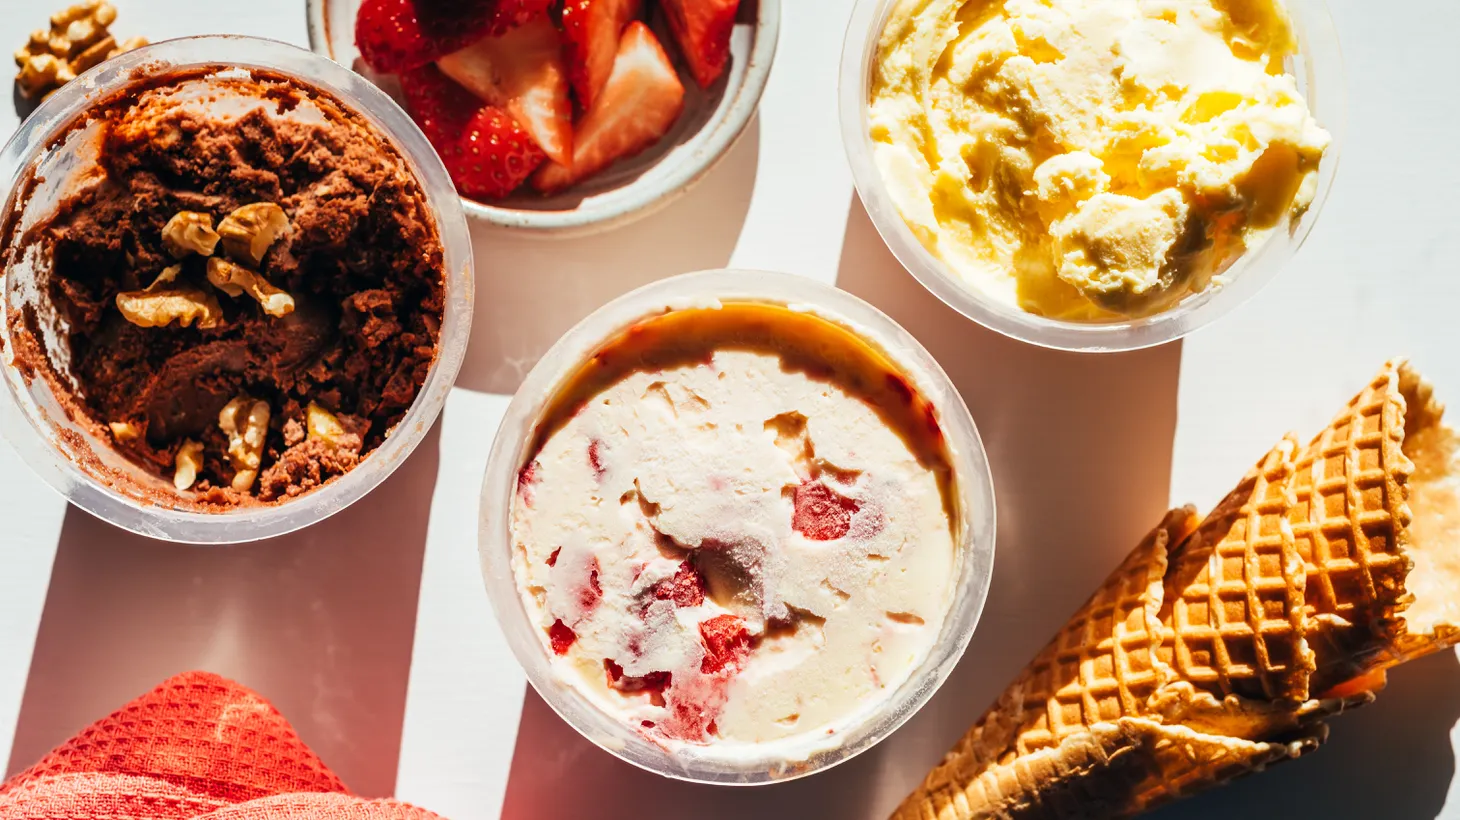 These no-churn ice creams are tasty and easy to make.